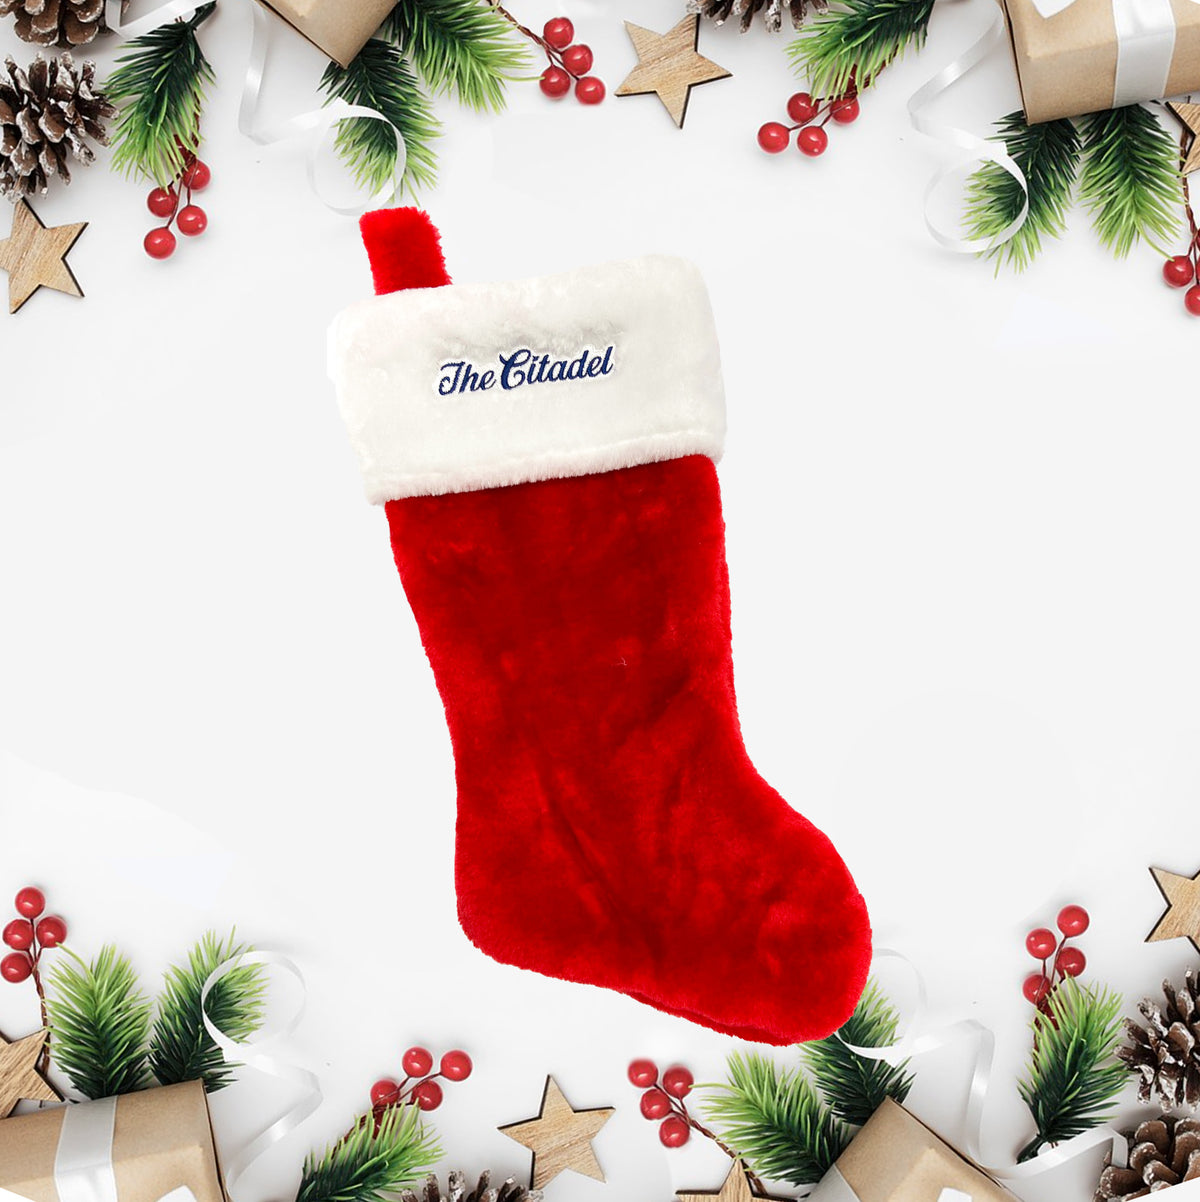 The Citadel, Limited Edition Plush Embroidered Christmas Stocking